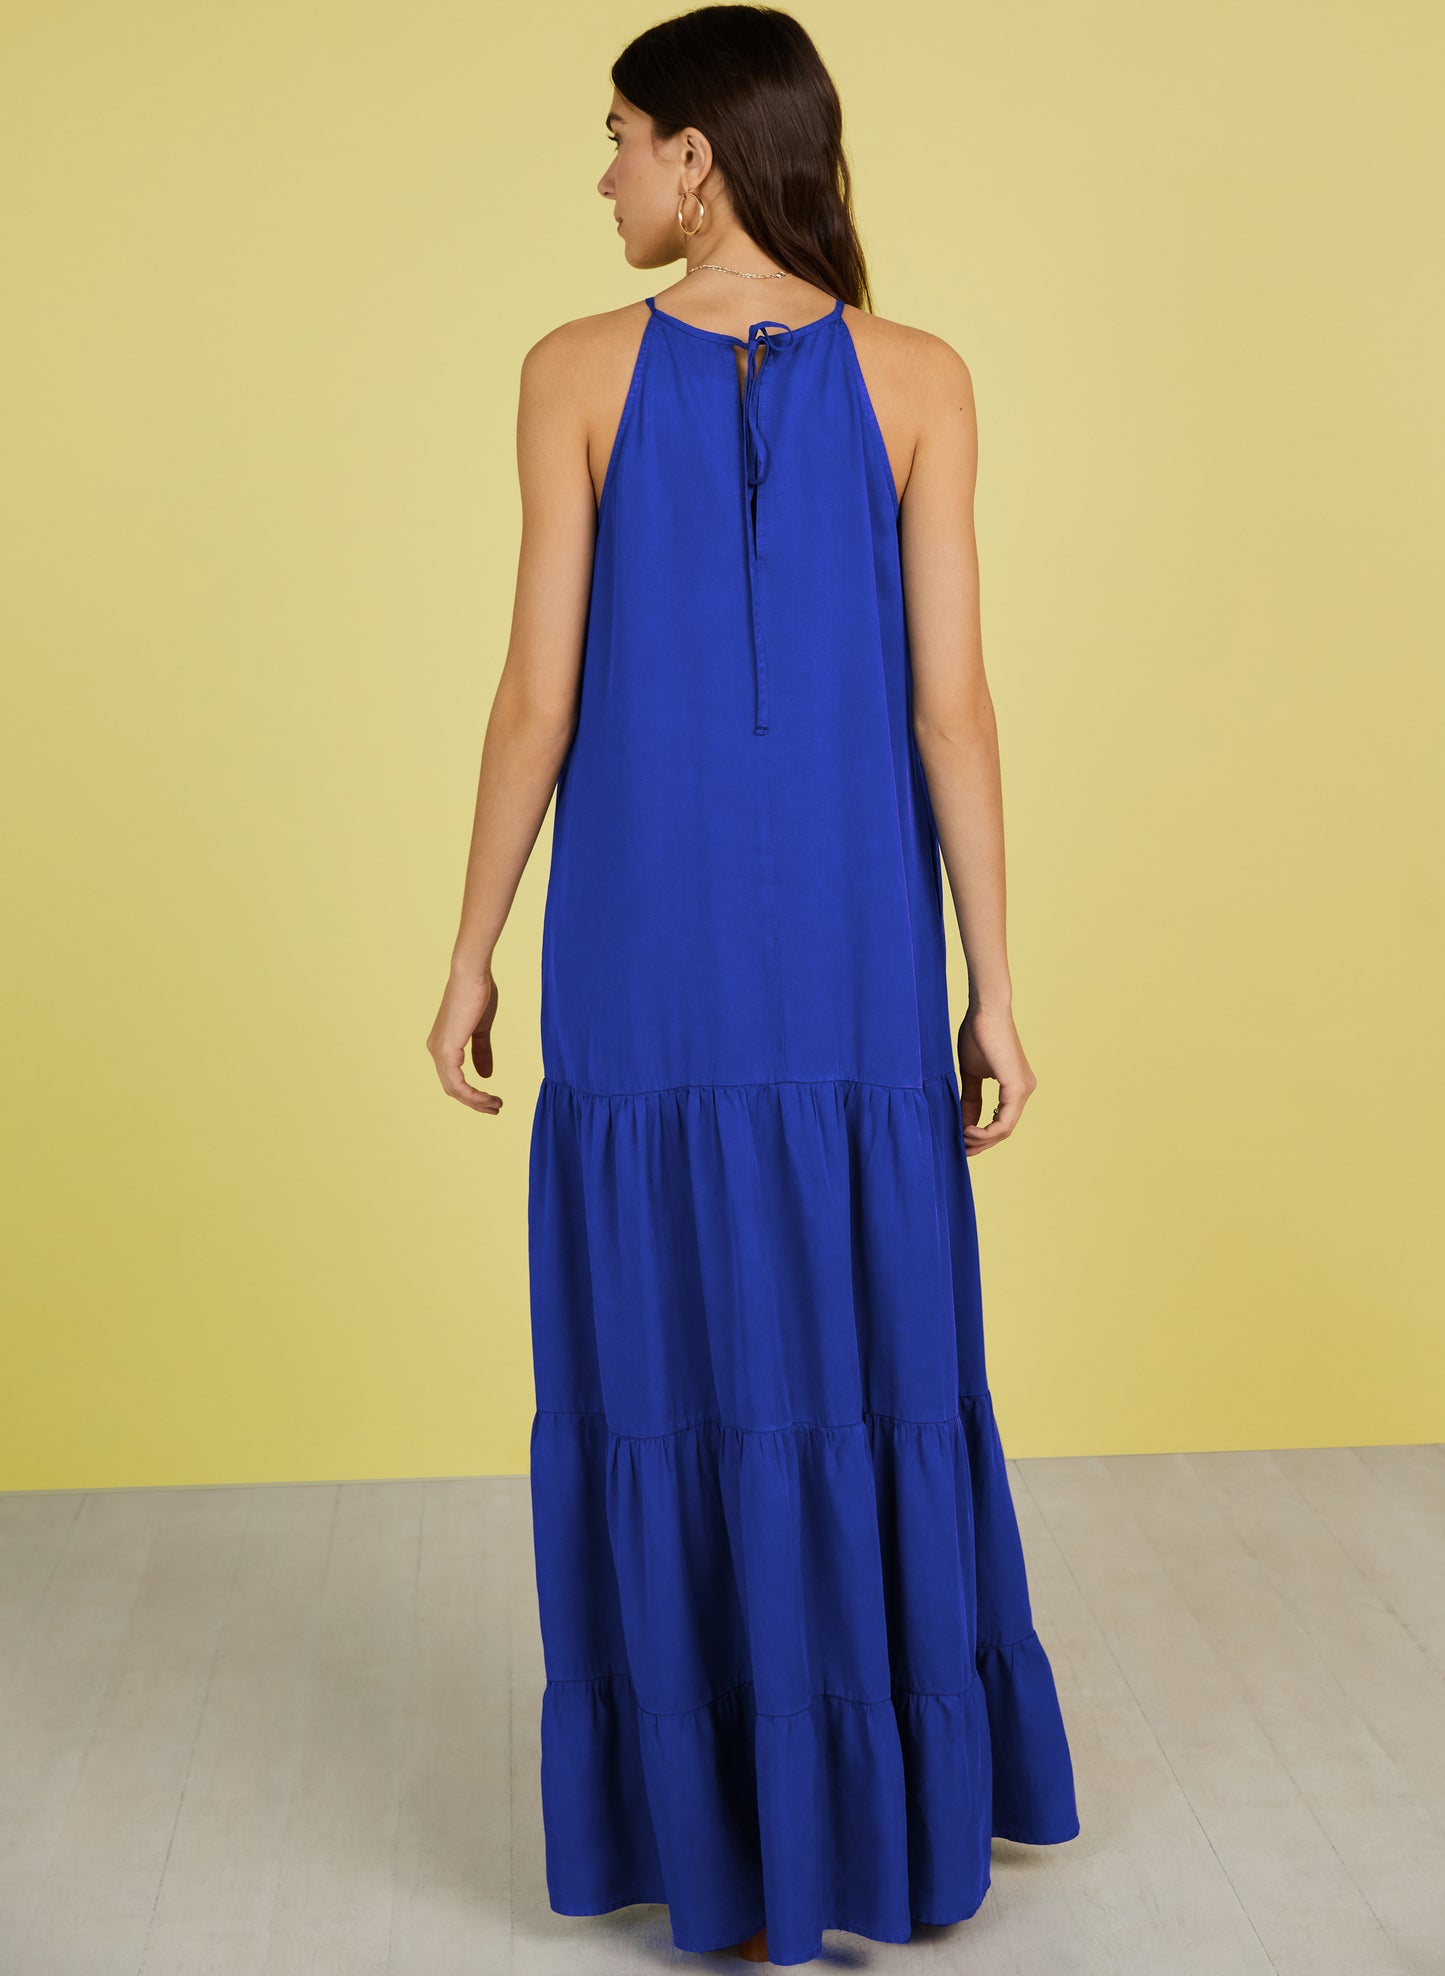 RENT - Everly Dress with TENCEL™